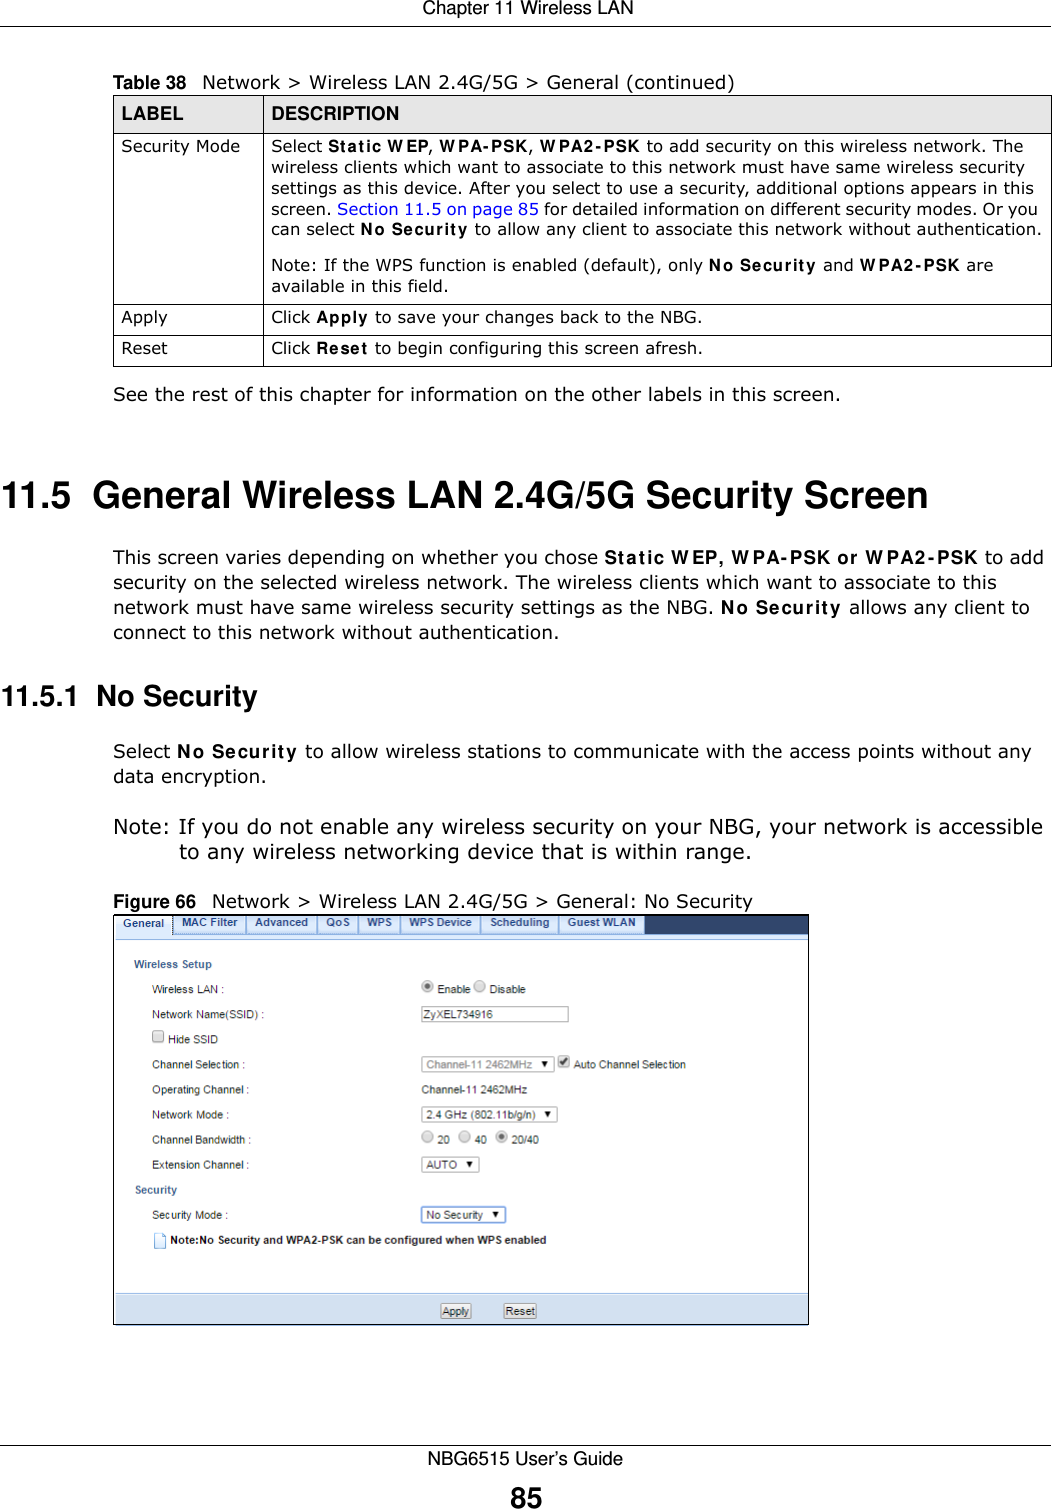  Chapter 11 Wireless LANNBG6515 User’s Guide85See the rest of this chapter for information on the other labels in this screen. 11.5  General Wireless LAN 2.4G/5G Security Screen This screen varies depending on whether you chose Static WEP, WPA-PSK or WPA2-PSK to add security on the selected wireless network. The wireless clients which want to associate to this network must have same wireless security settings as the NBG. No Security allows any client to connect to this network without authentication.11.5.1  No SecuritySelect No Security to allow wireless stations to communicate with the access points without any data encryption.Note: If you do not enable any wireless security on your NBG, your network is accessible to any wireless networking device that is within range.Figure 66   Network &gt; Wireless LAN 2.4G/5G &gt; General: No SecuritySecurity Mode Select Static WEP, WPA-PSK, WPA2-PSK to add security on this wireless network. The wireless clients which want to associate to this network must have same wireless security settings as this device. After you select to use a security, additional options appears in this screen. Section 11.5 on page 85 for detailed information on different security modes. Or you can select No Security to allow any client to associate this network without authentication.Note: If the WPS function is enabled (default), only No Security and WPA2-PSK are available in this field.Apply Click Apply to save your changes back to the NBG.Reset Click Reset to begin configuring this screen afresh.Table 38   Network &gt; Wireless LAN 2.4G/5G &gt; General (continued)LABEL DESCRIPTION